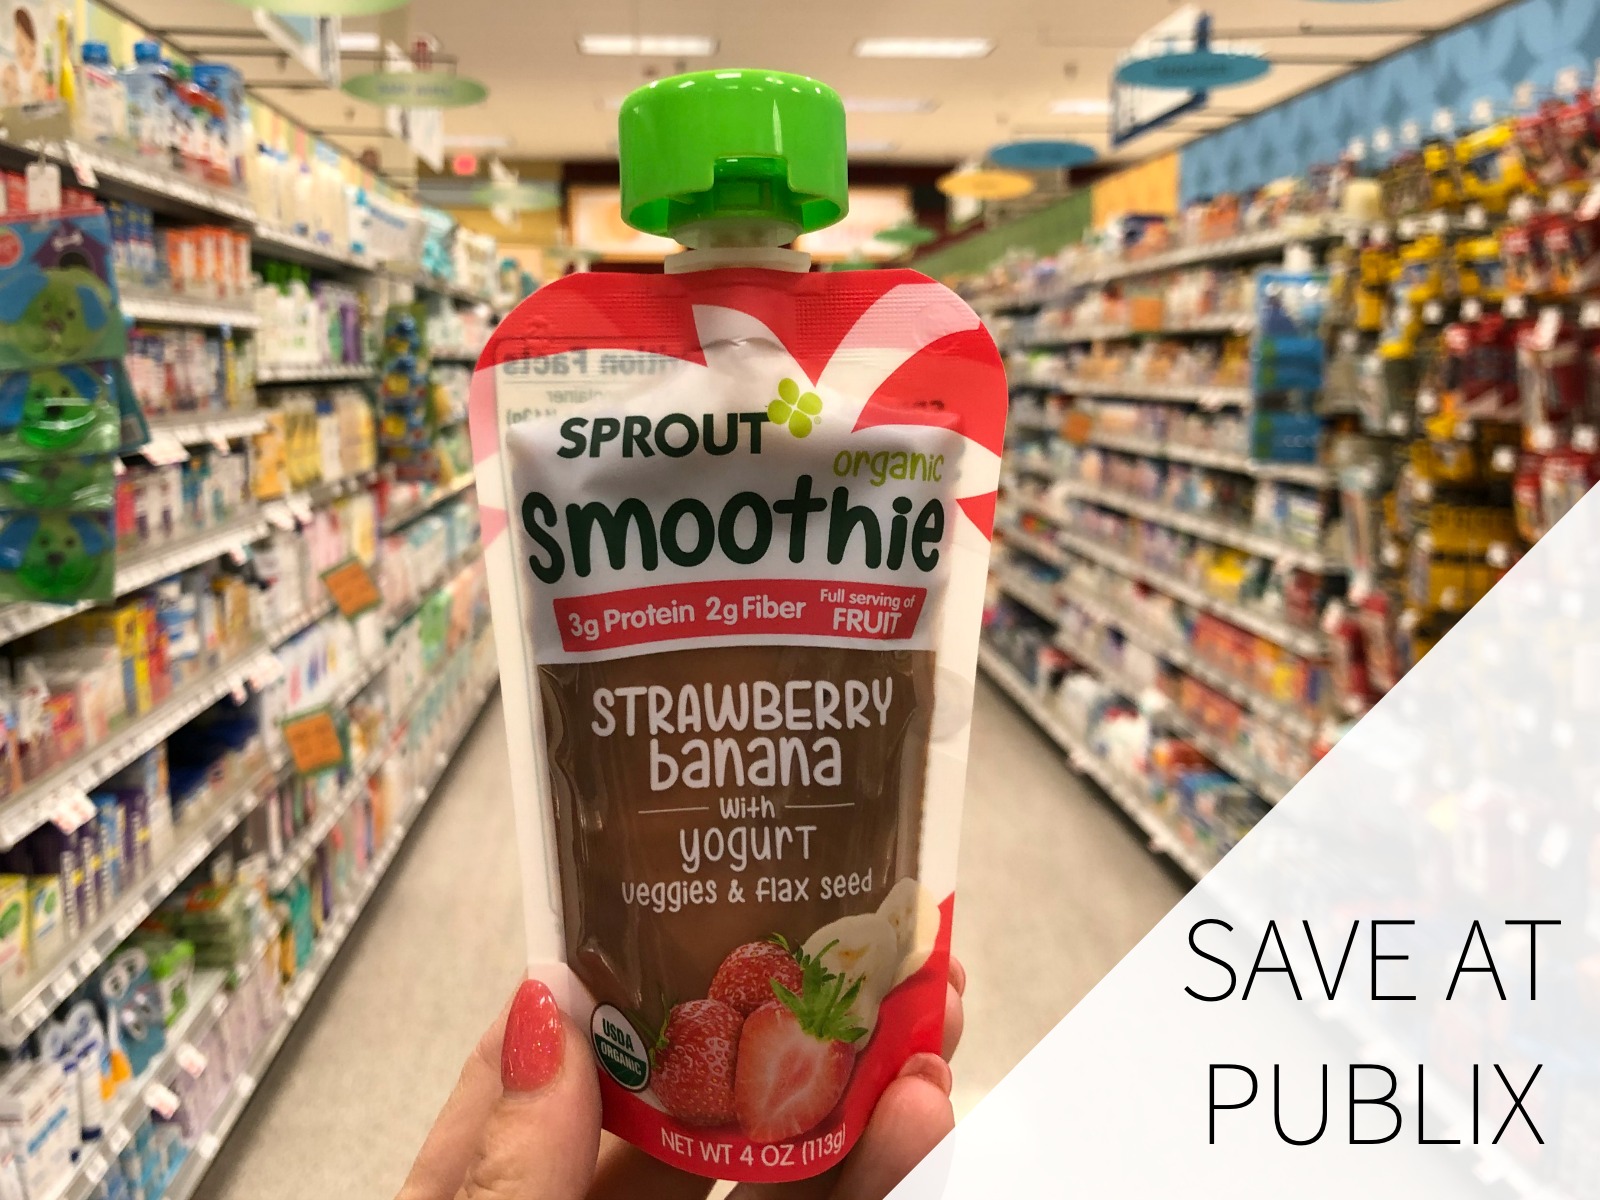 Fuel Up With Sprout Pouches For Toddlers - Find A Big Selection At Your Local Publix on I Heart Publix